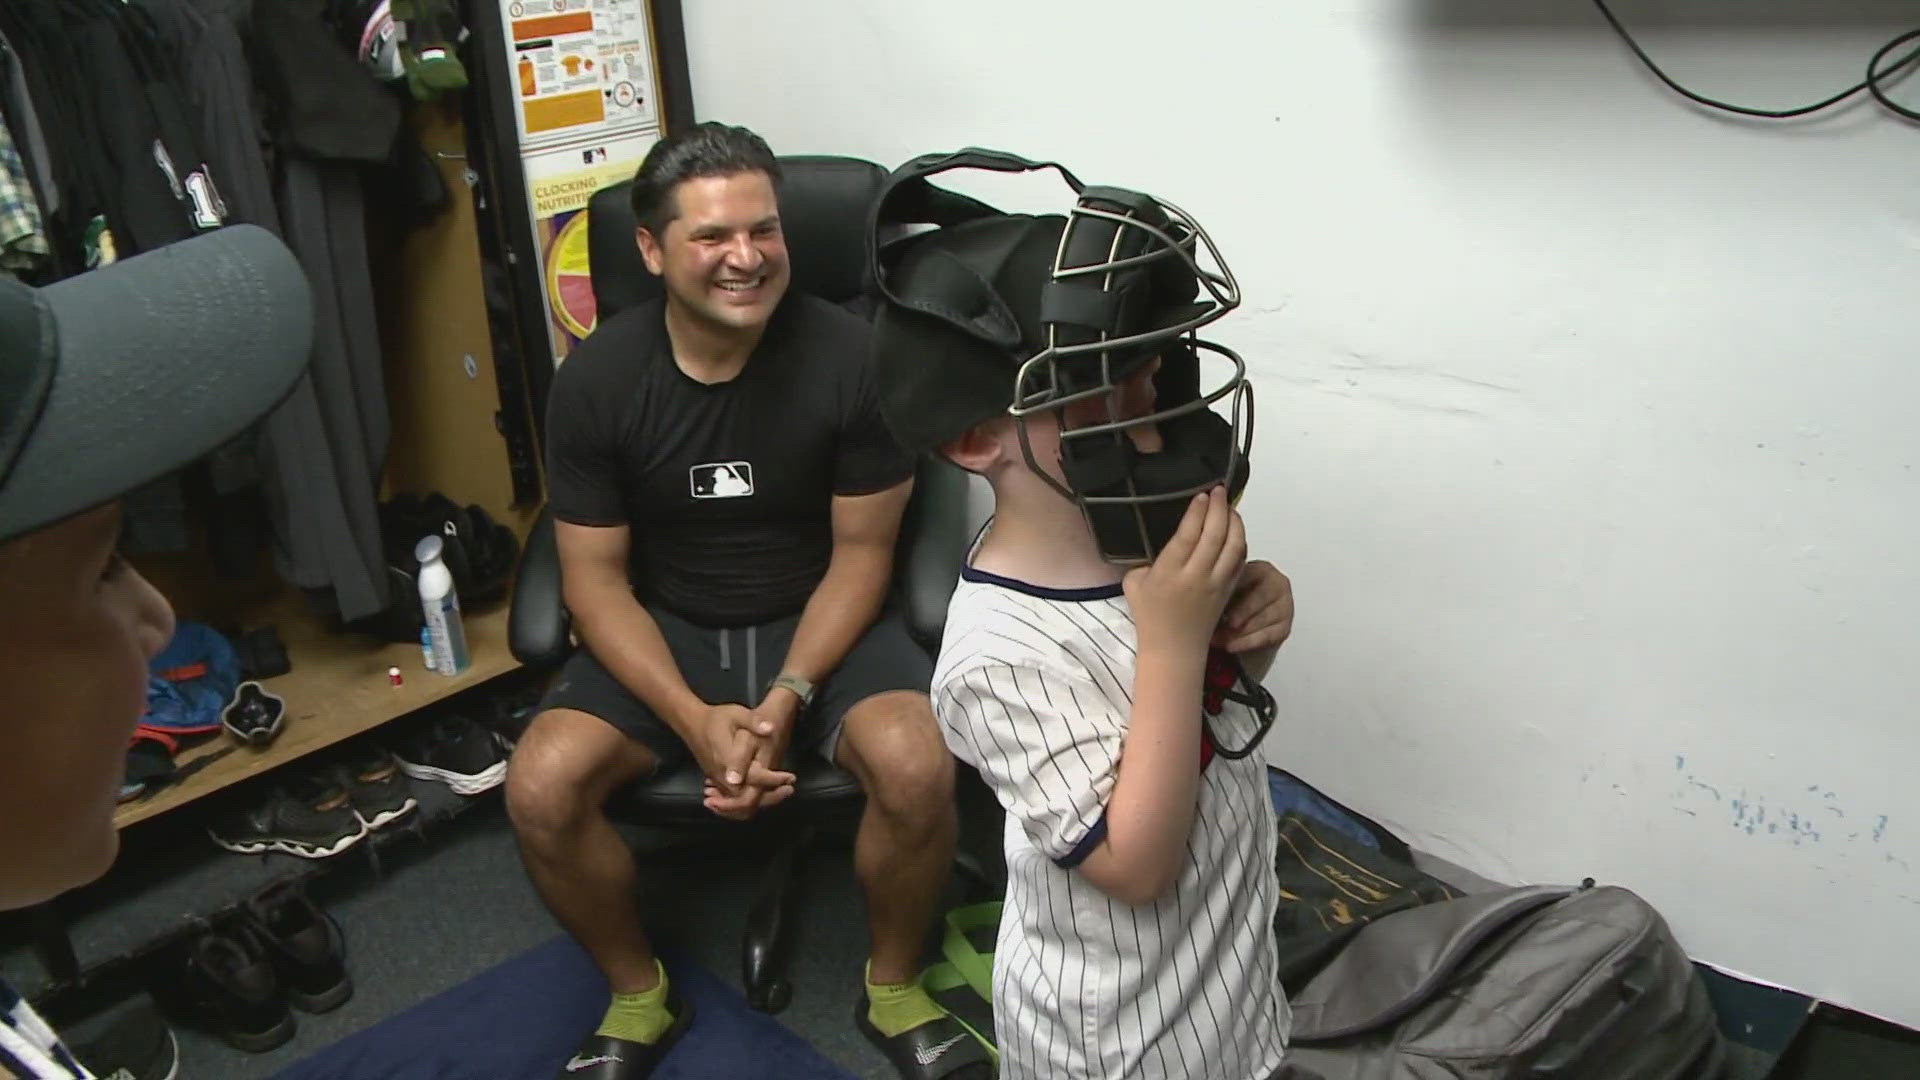 A 7-year-old boy who is a heart transplant recipient had the opportunity to meet MLB umpires ahead of Saturday's Cleveland Guardians game.